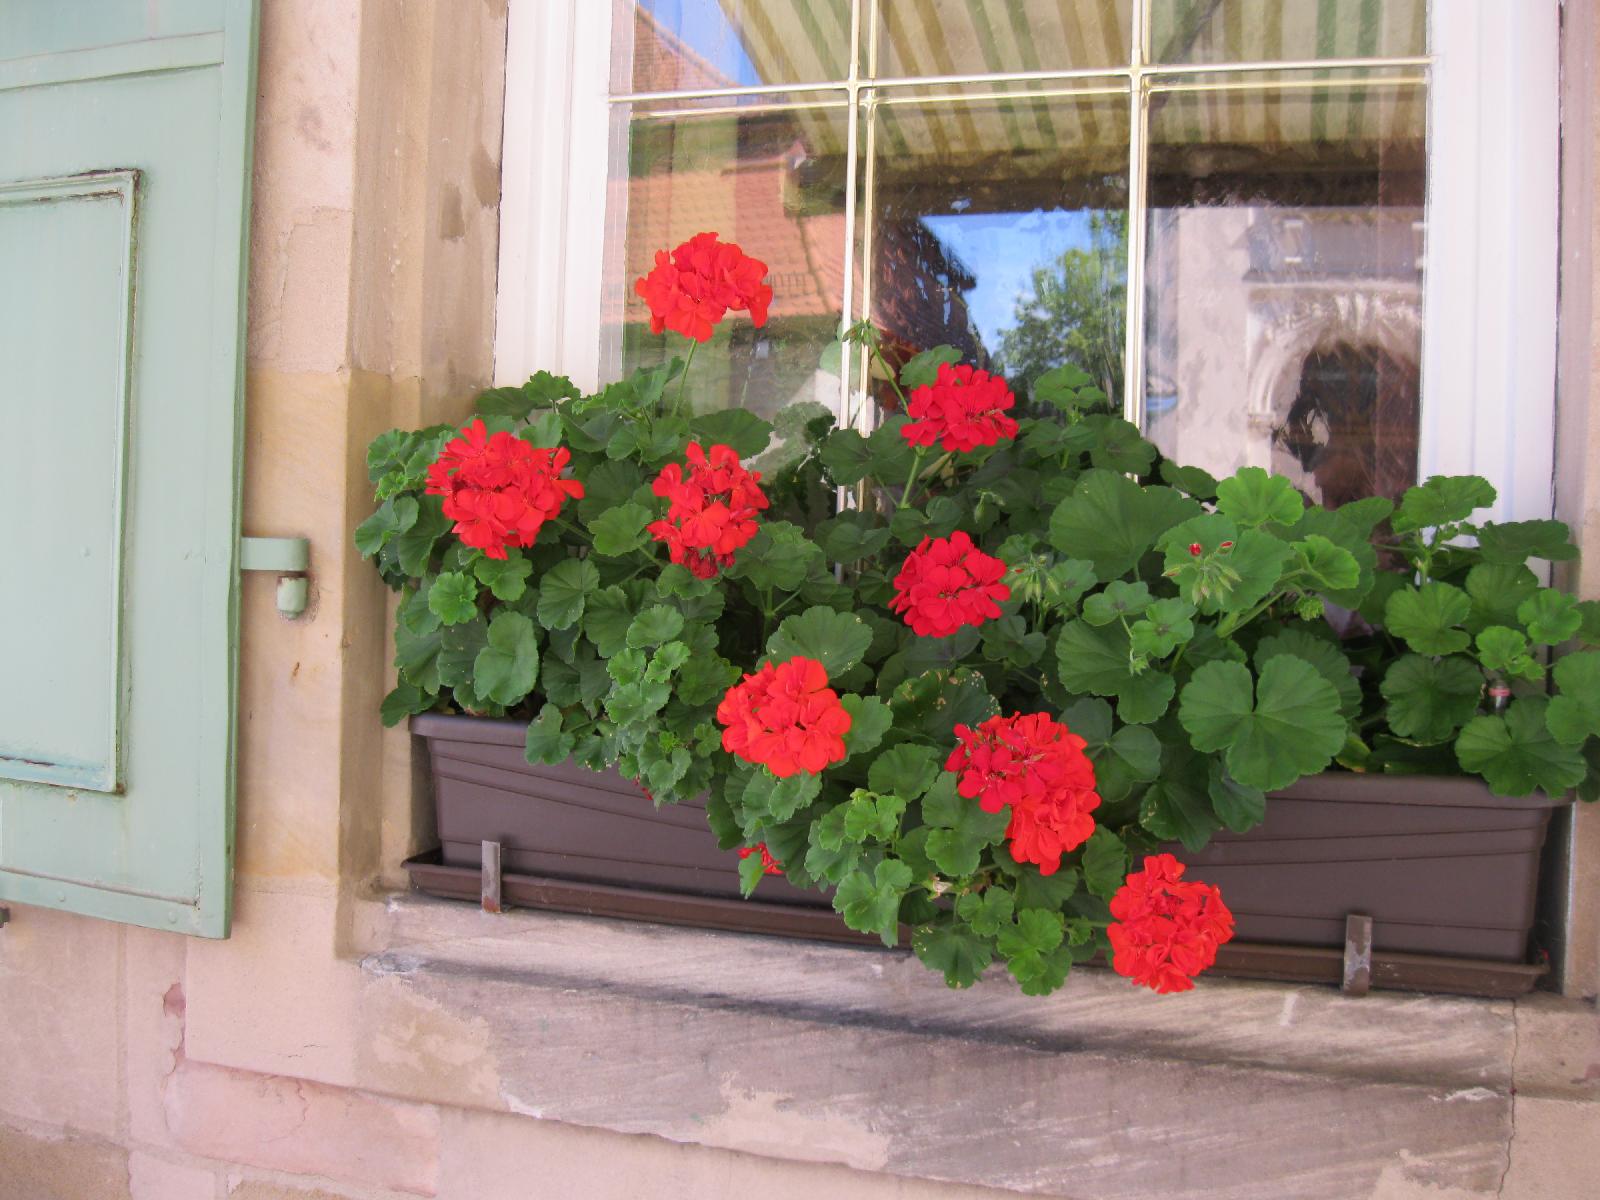 Many lovely Window boxes